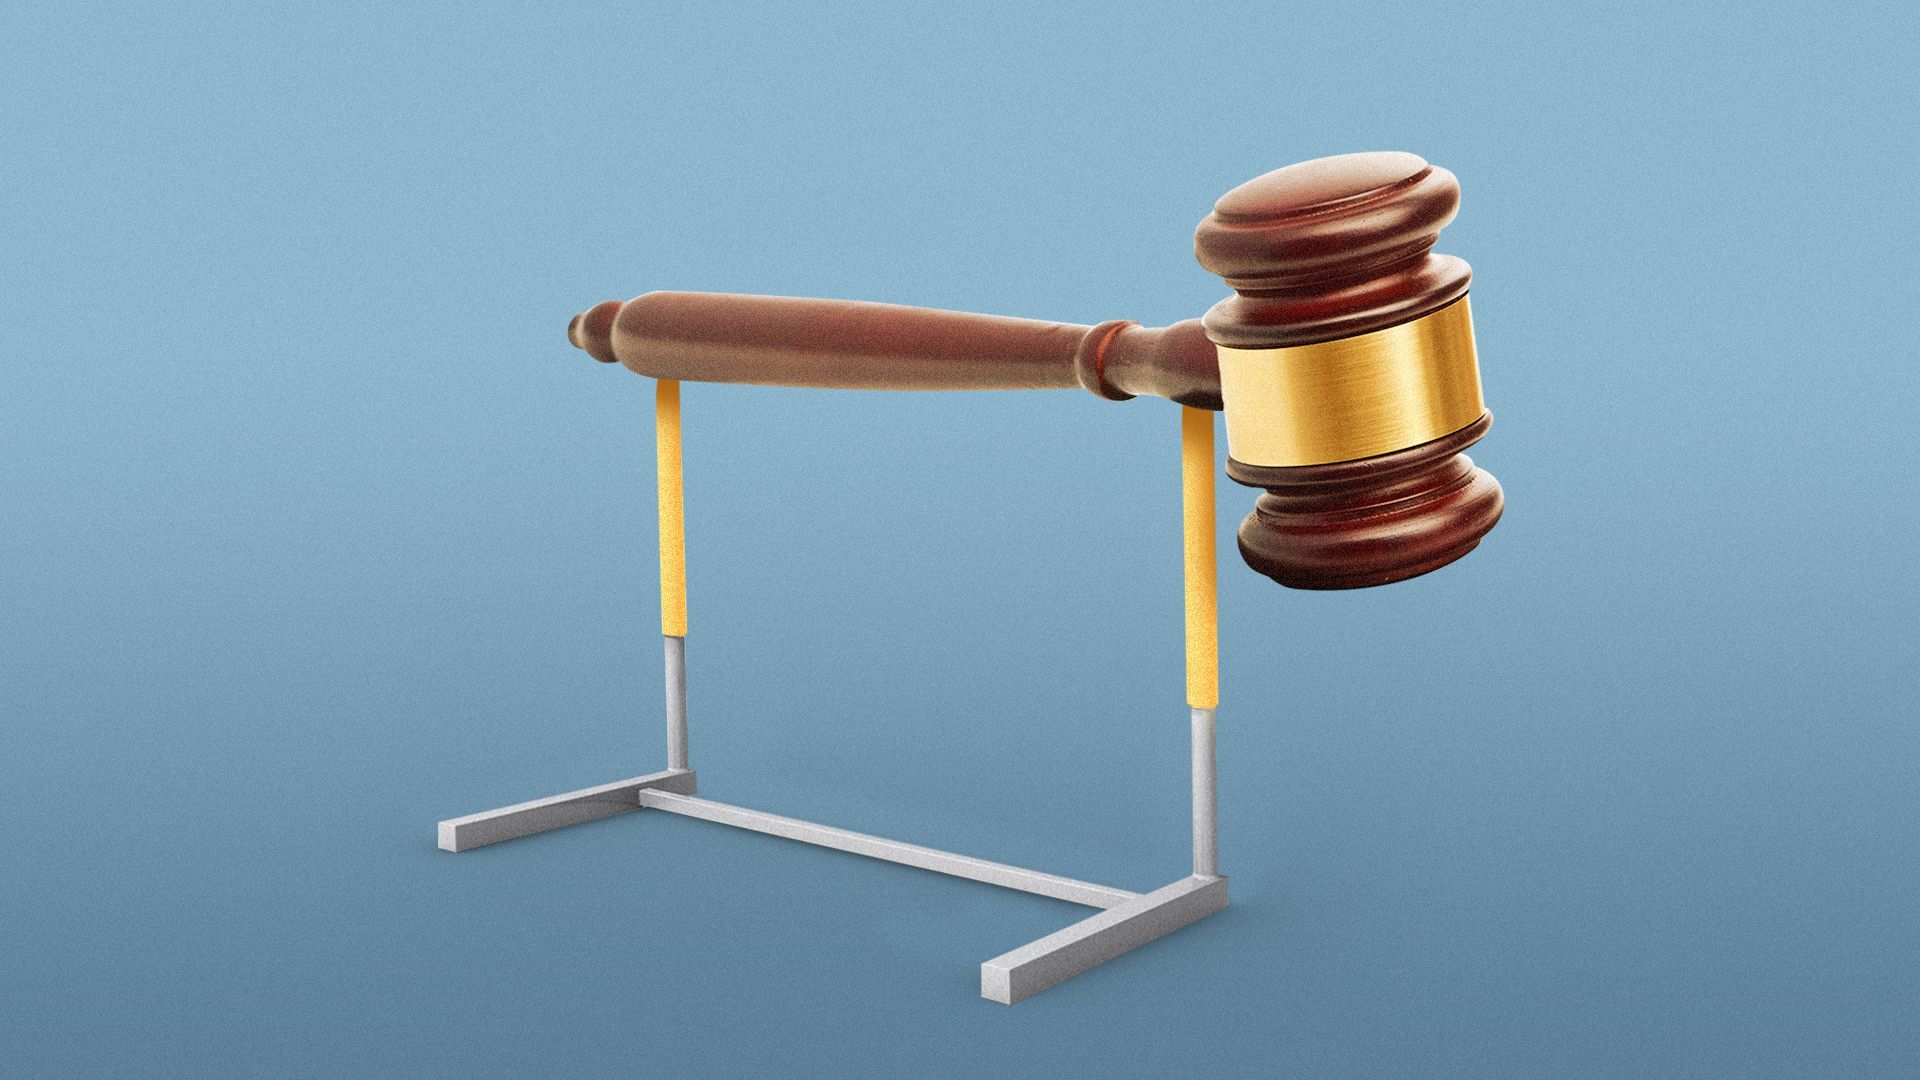 Illustration of a hurdle with a gavel as the hurdle board. 